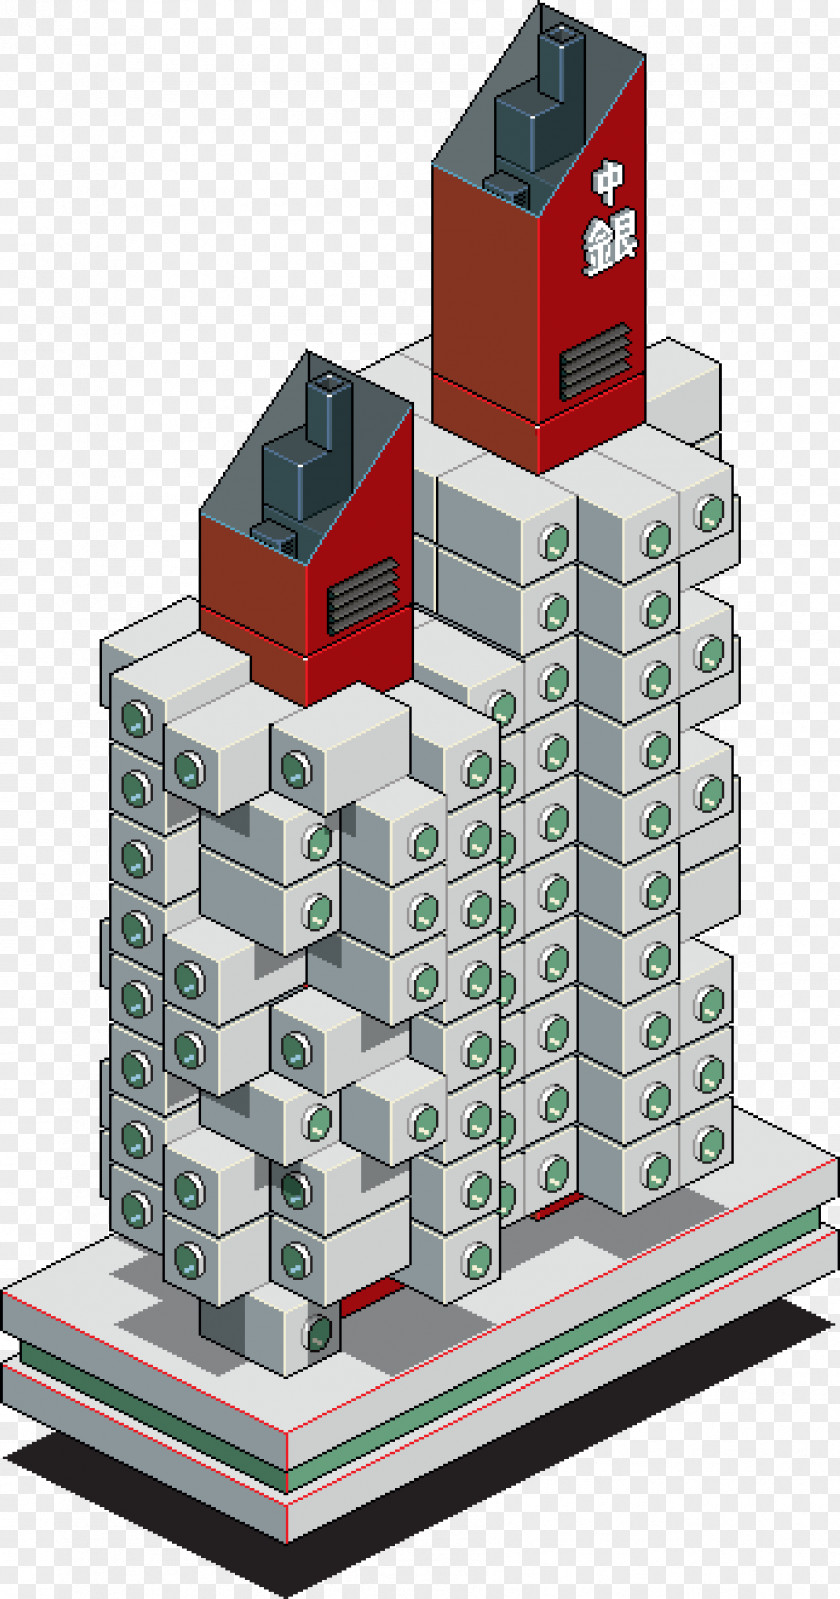 Buildings Nakagin Capsule Tower Architecture Building Plan PNG